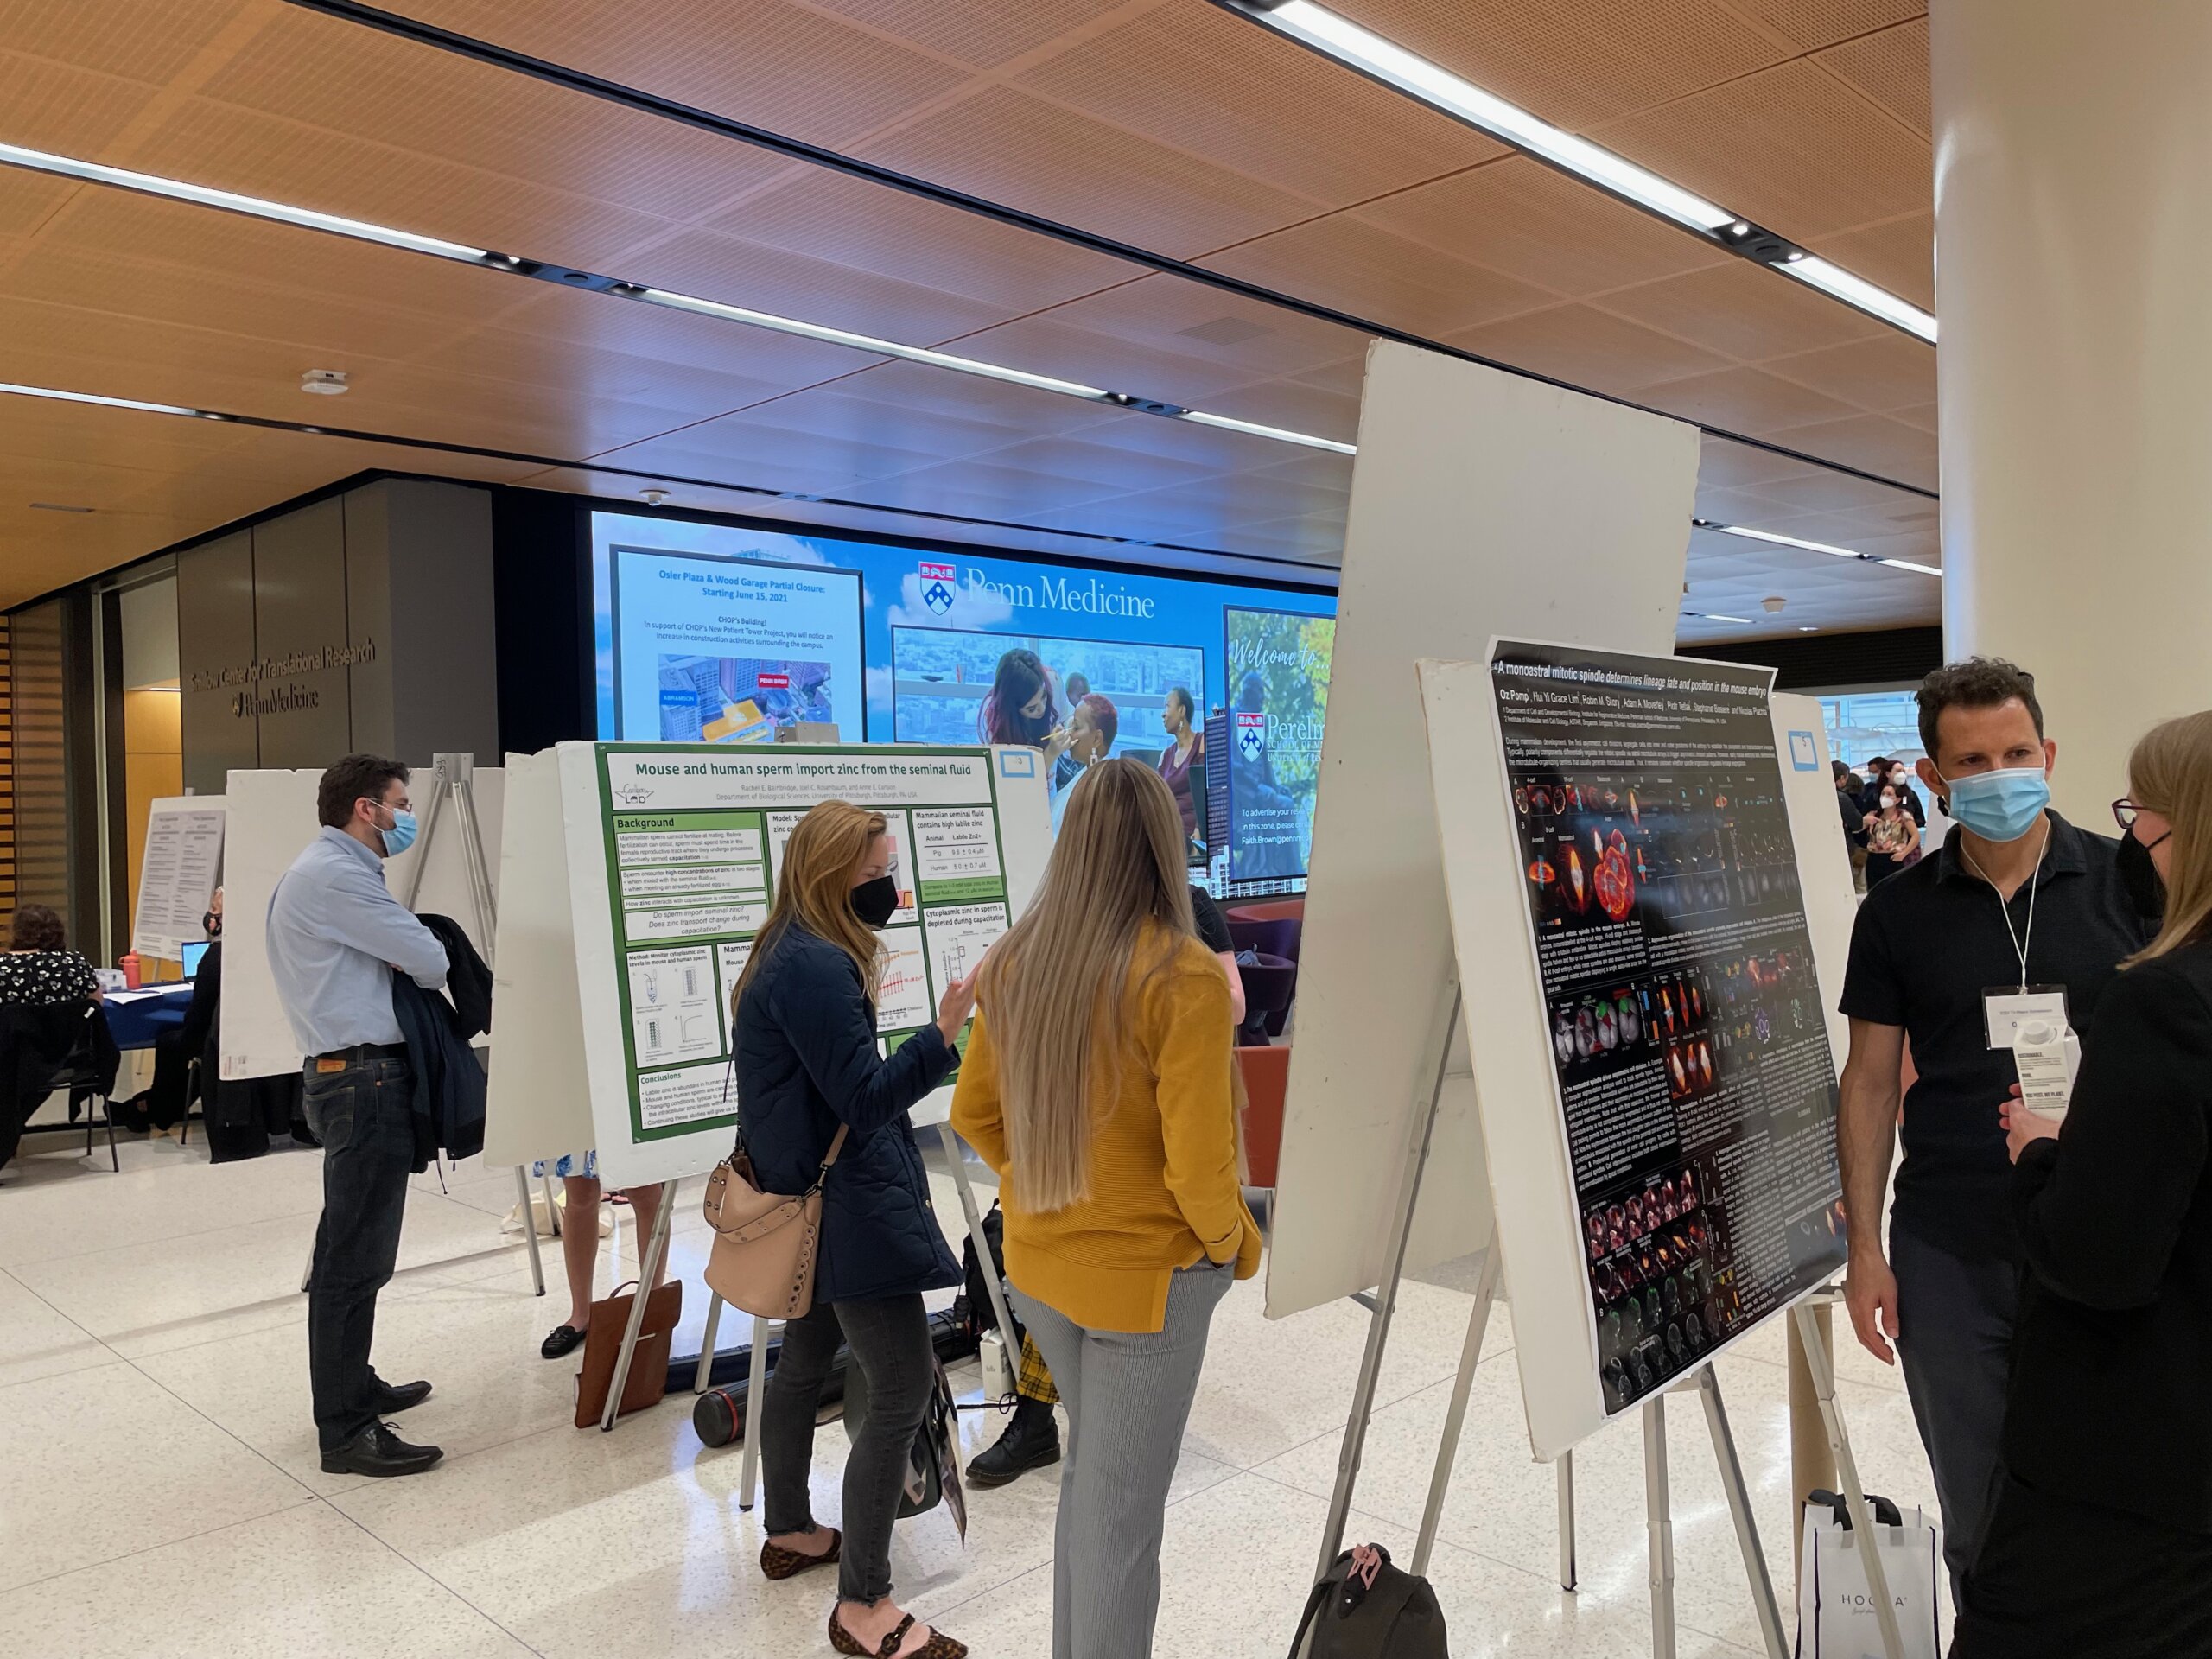 Small group of attendees with scientific posters presented by Cornell, Penn, and Pittsburgh trainees in a conference hall